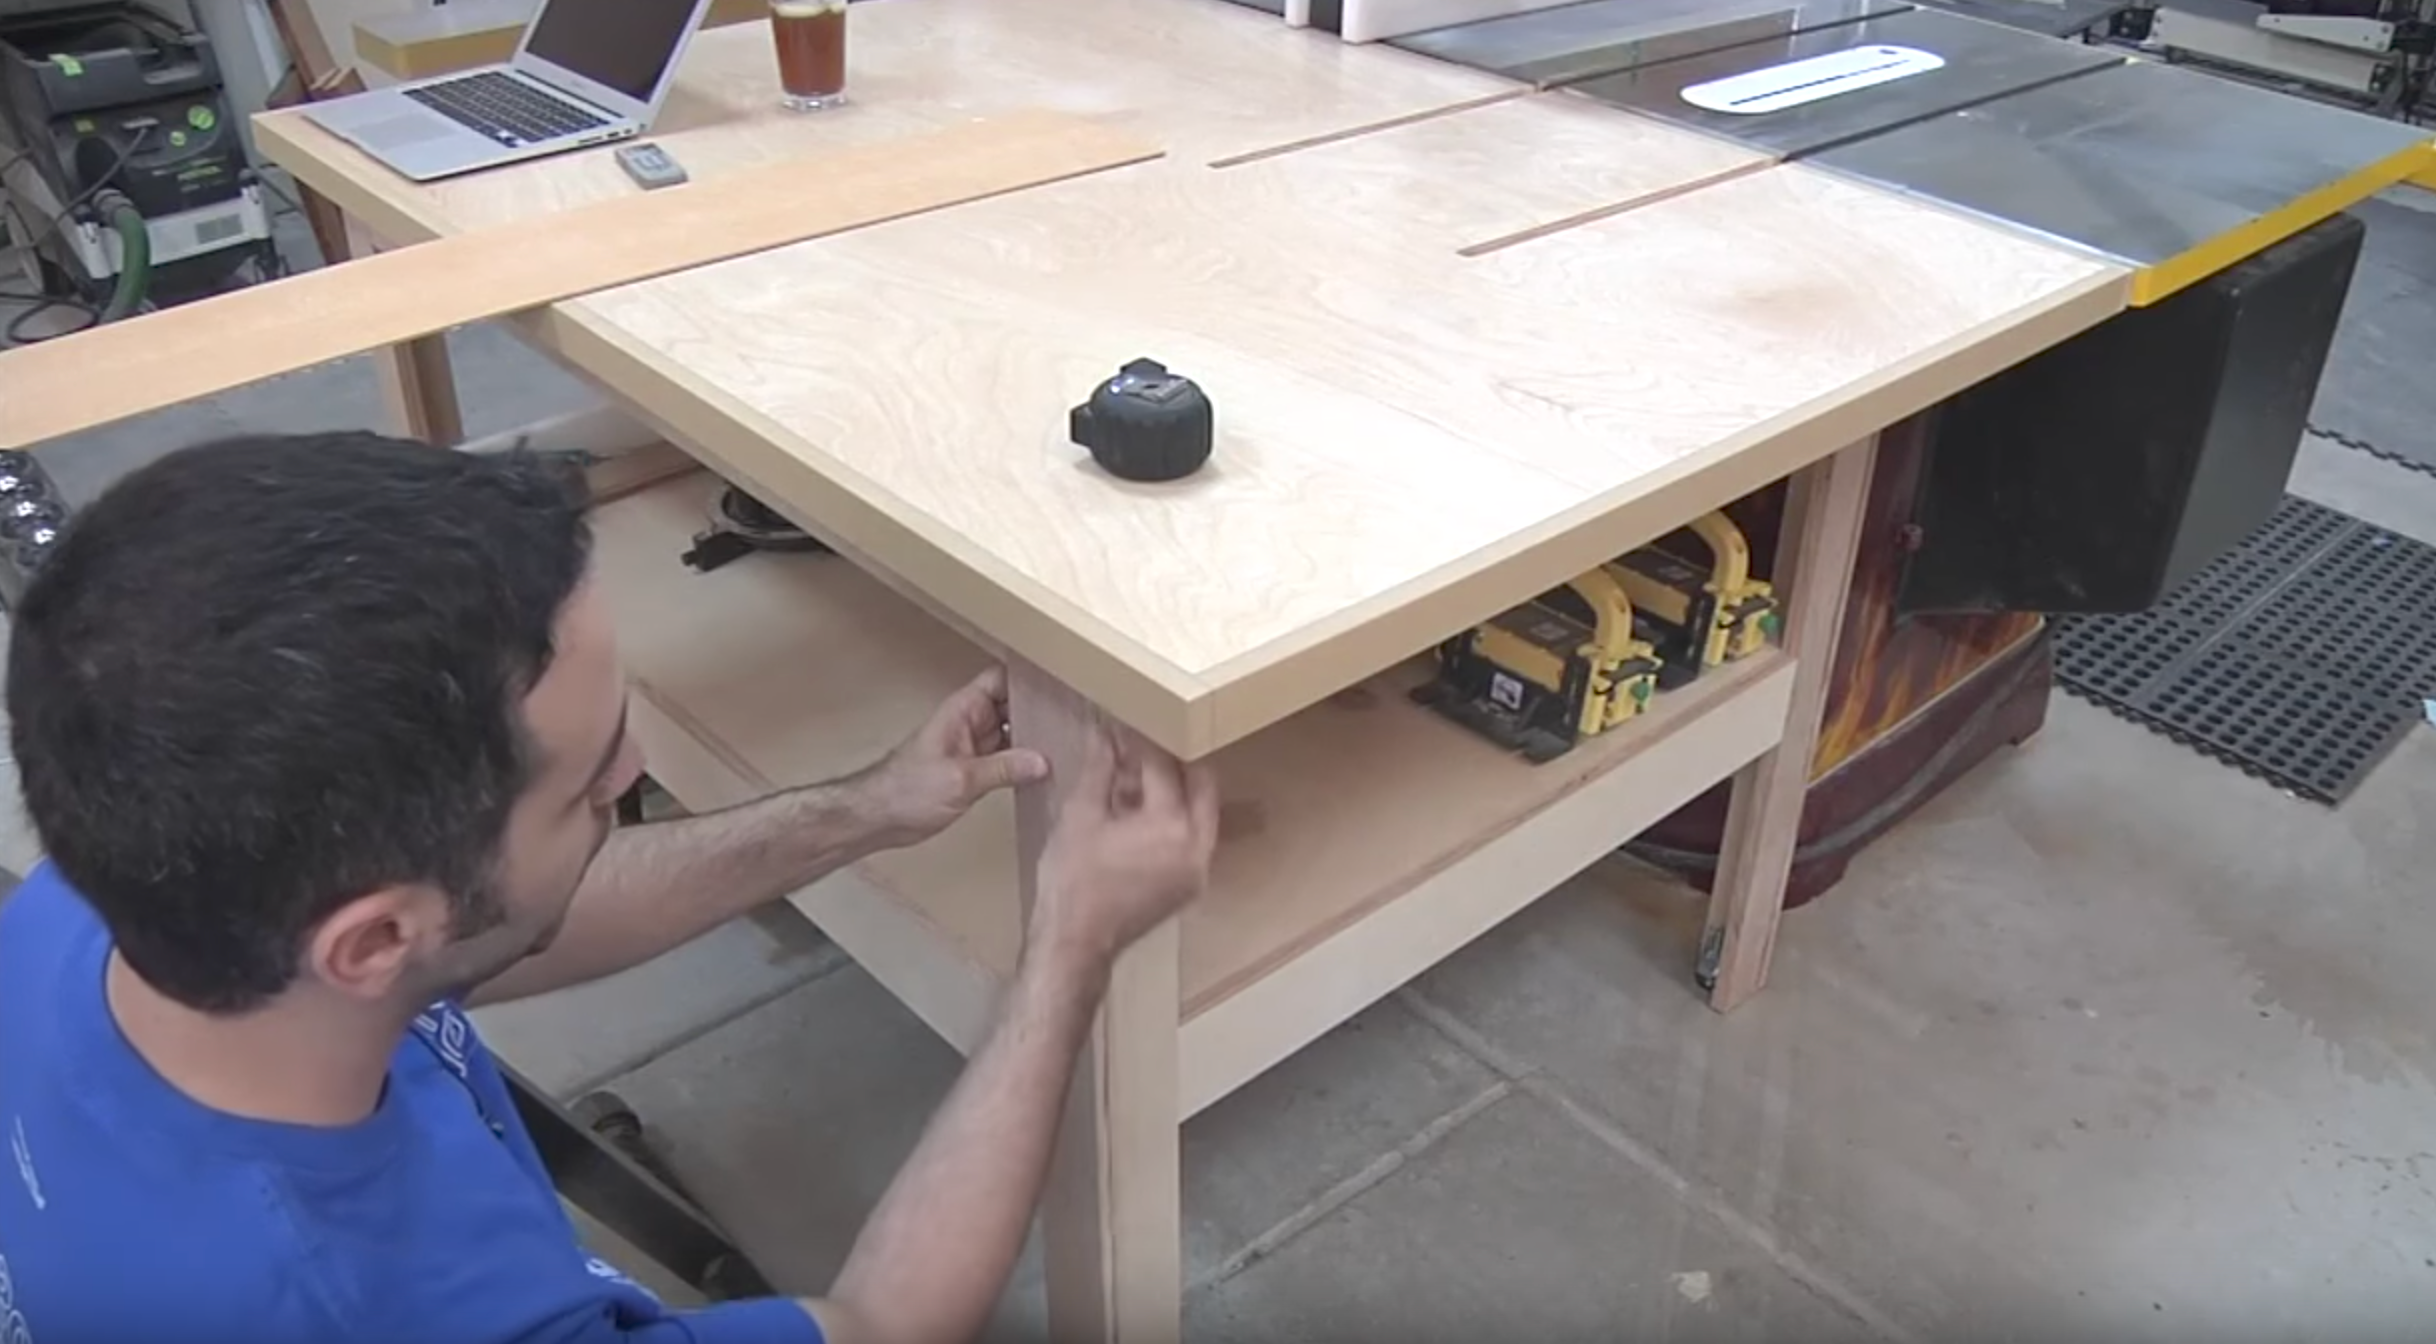 The 1-Hour Workbench / Outfeed Table // Woodworking DIY 